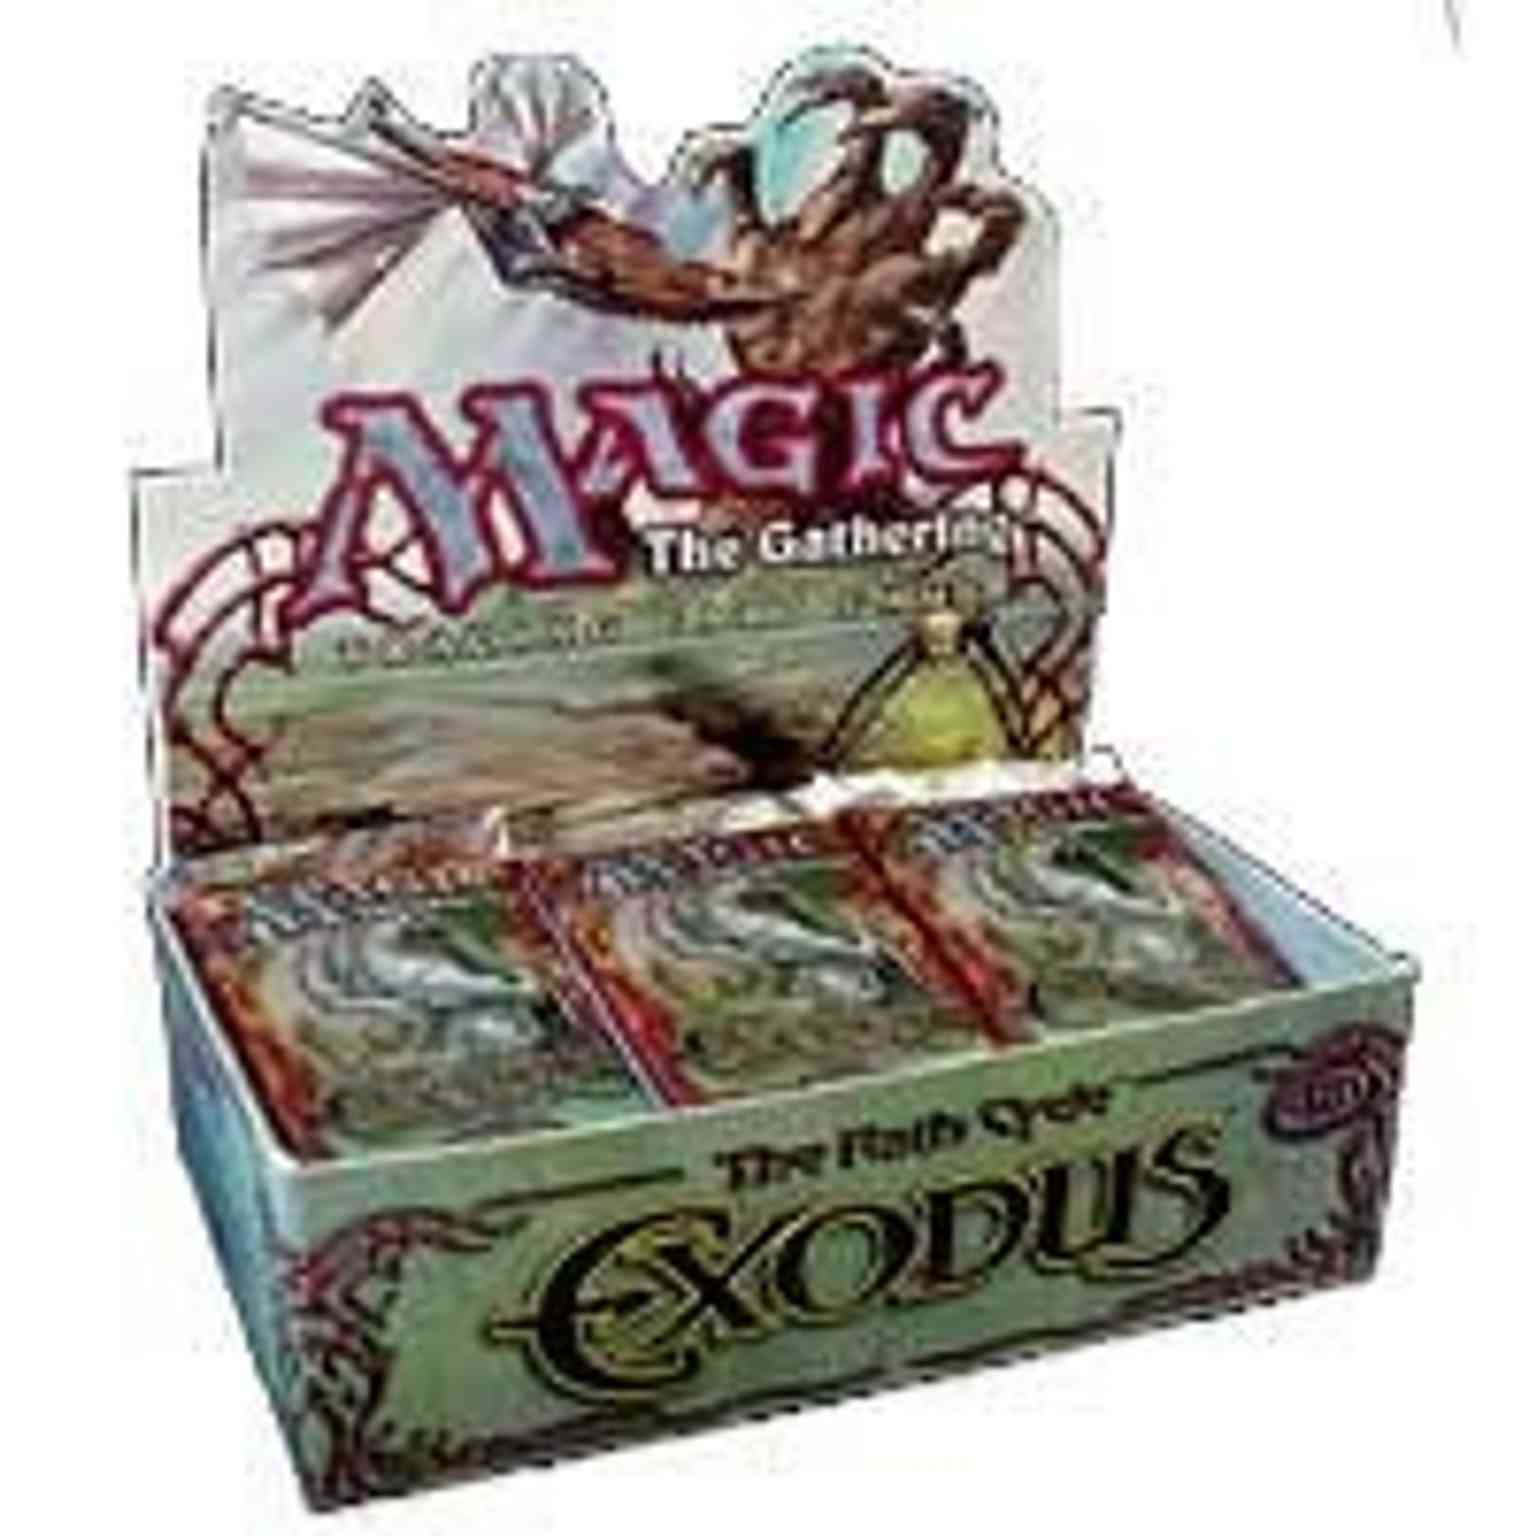 Exodus - Booster Box magic card front